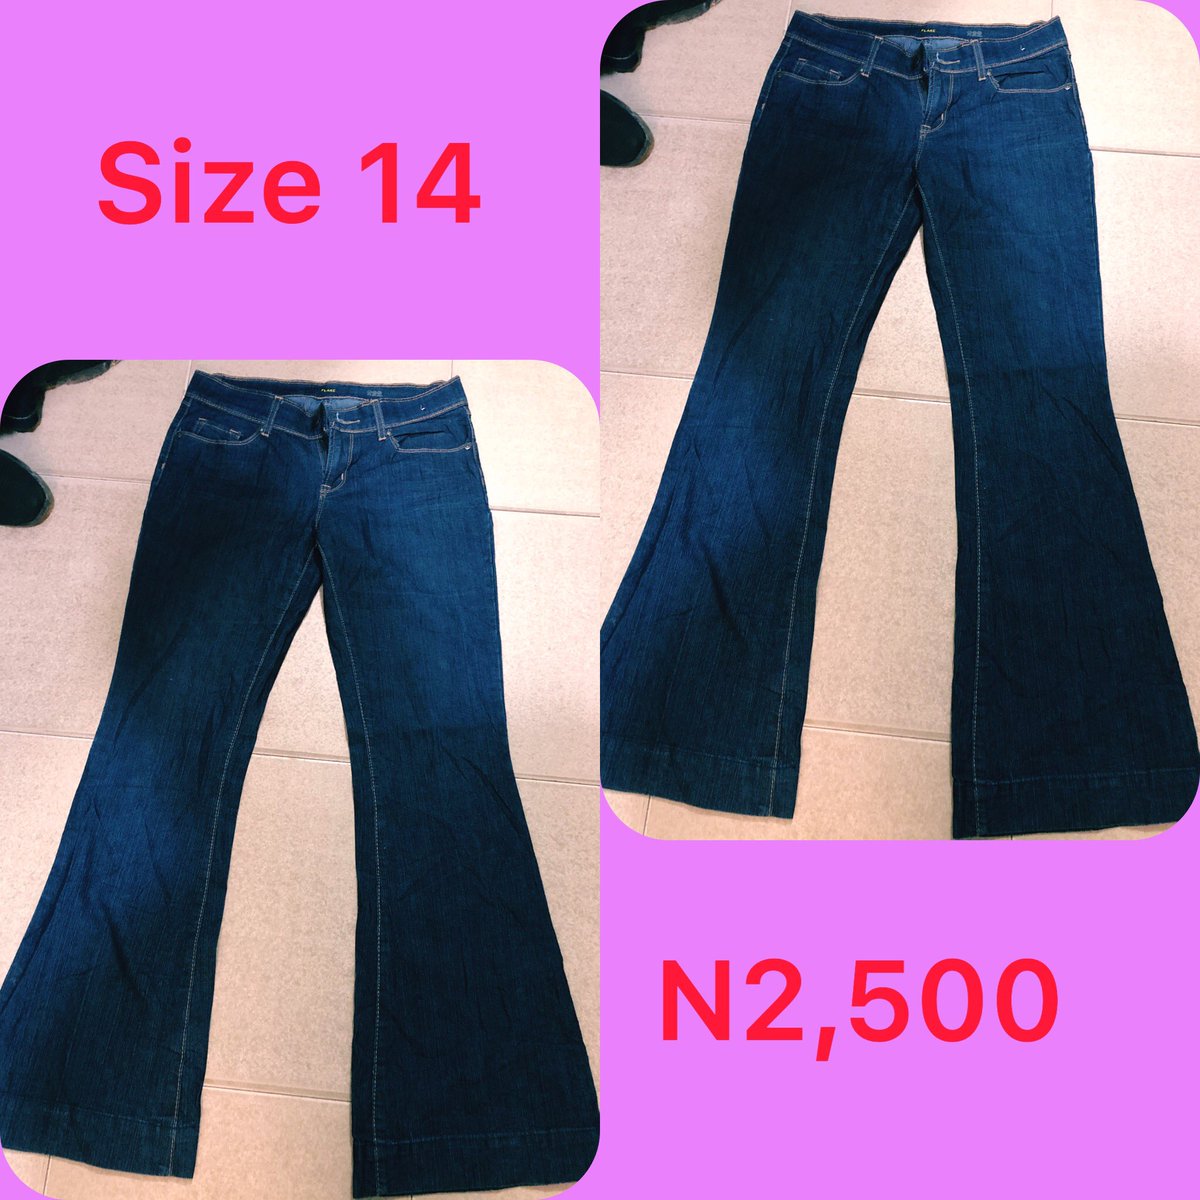 Slide 1: palazzo jeans      Size 14, N2,500Slide 2: palazzo jeans       Size 16, Price: N2,500Slide 3: palazzo jeans       Size 16, Price: N2,500Slide 4: palazzo jeans       Size 12, Price N2,500